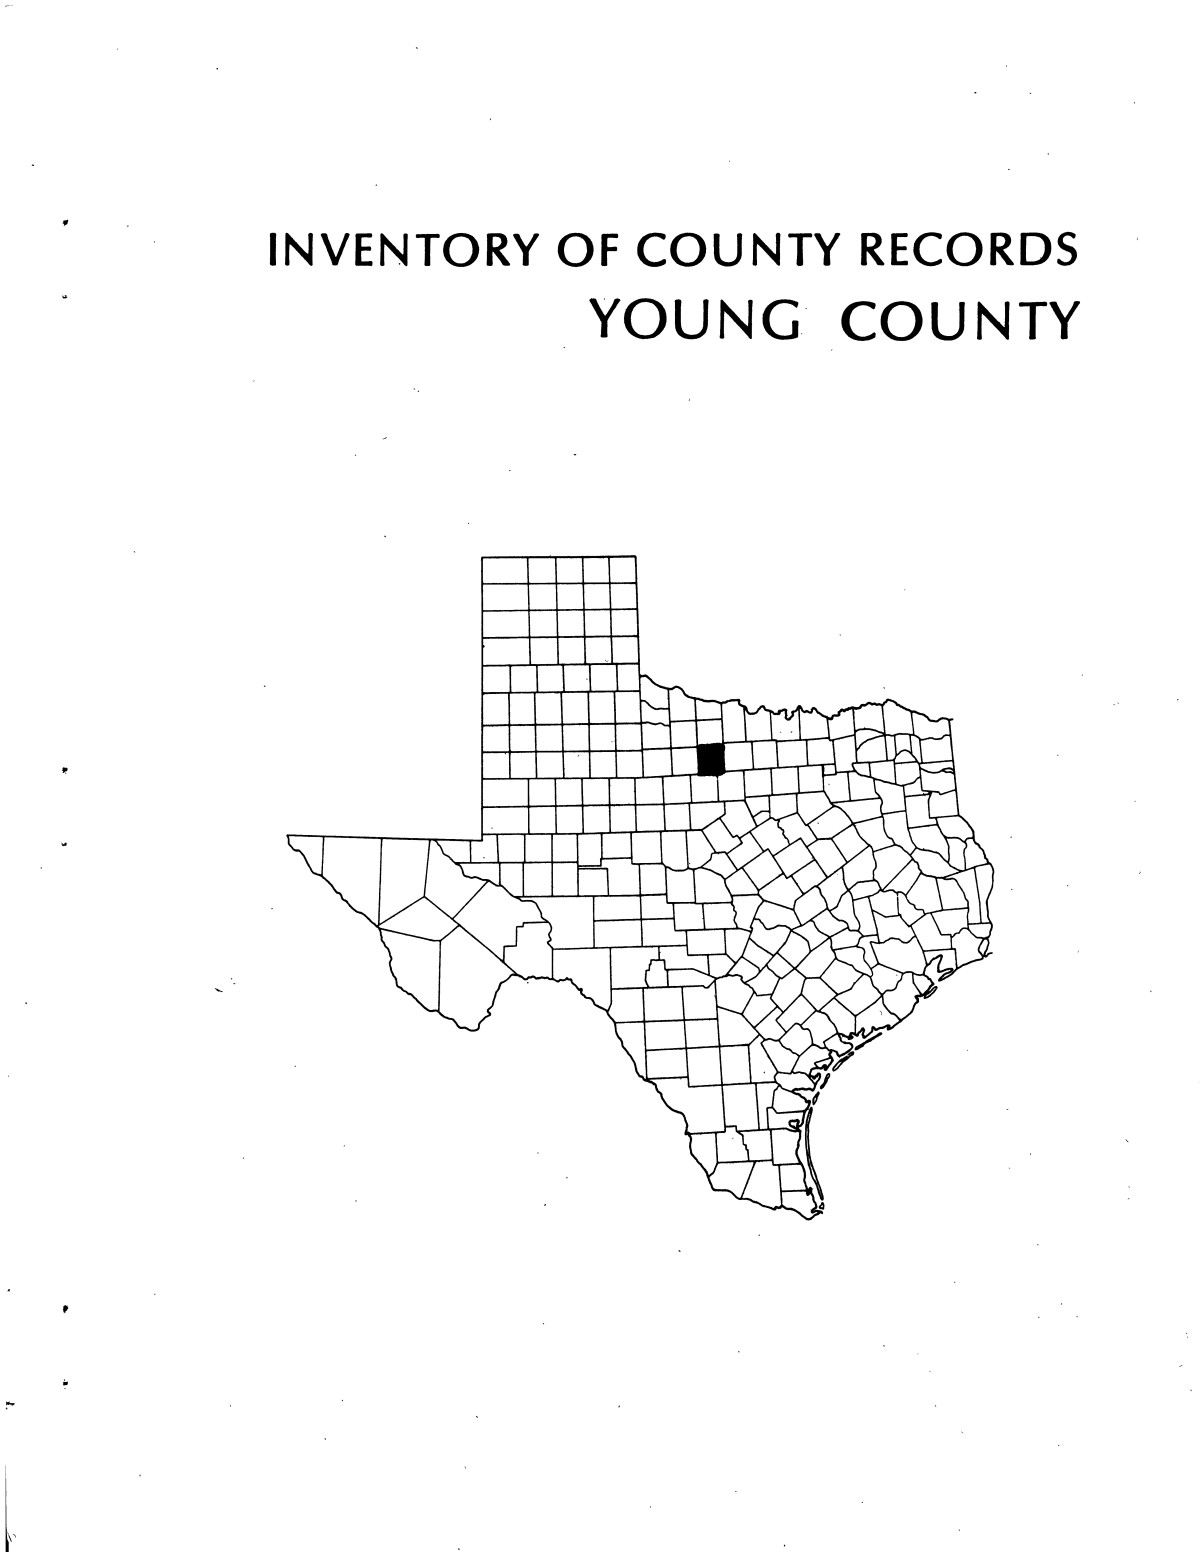 Inventory of county records, Young County courthouse, Graham, Texas
                                                
                                                    Front Cover
                                                